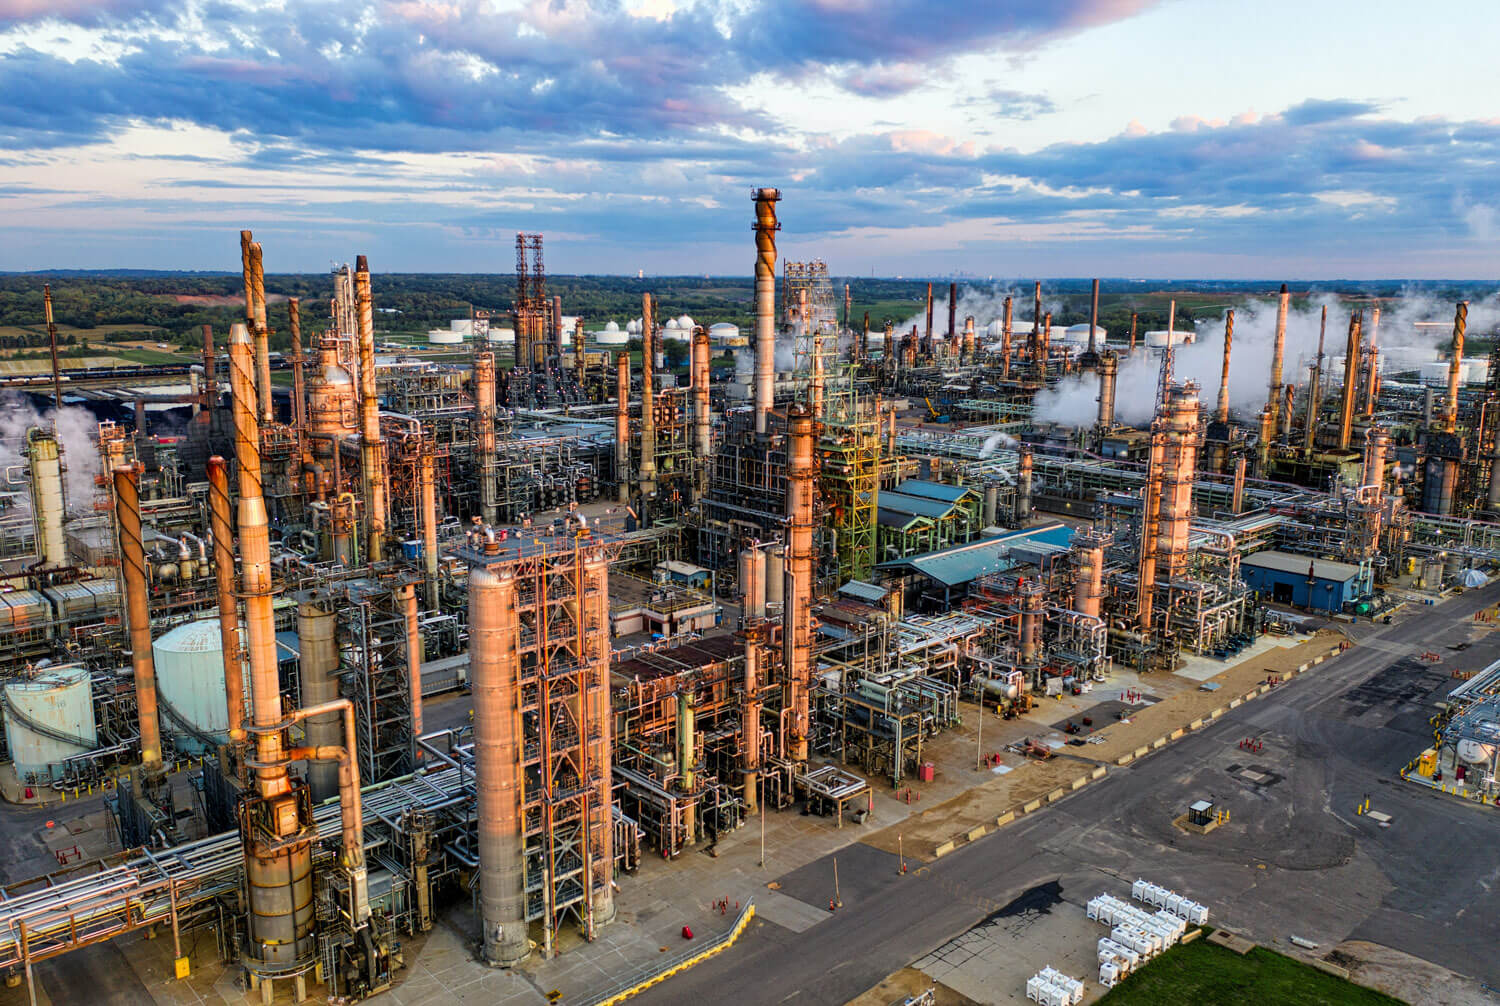 An aerial view of the Pine Bend oil refinery in Rosemount, Minnesota, showing a network of pipes, storage tanks, and industrial buildings.